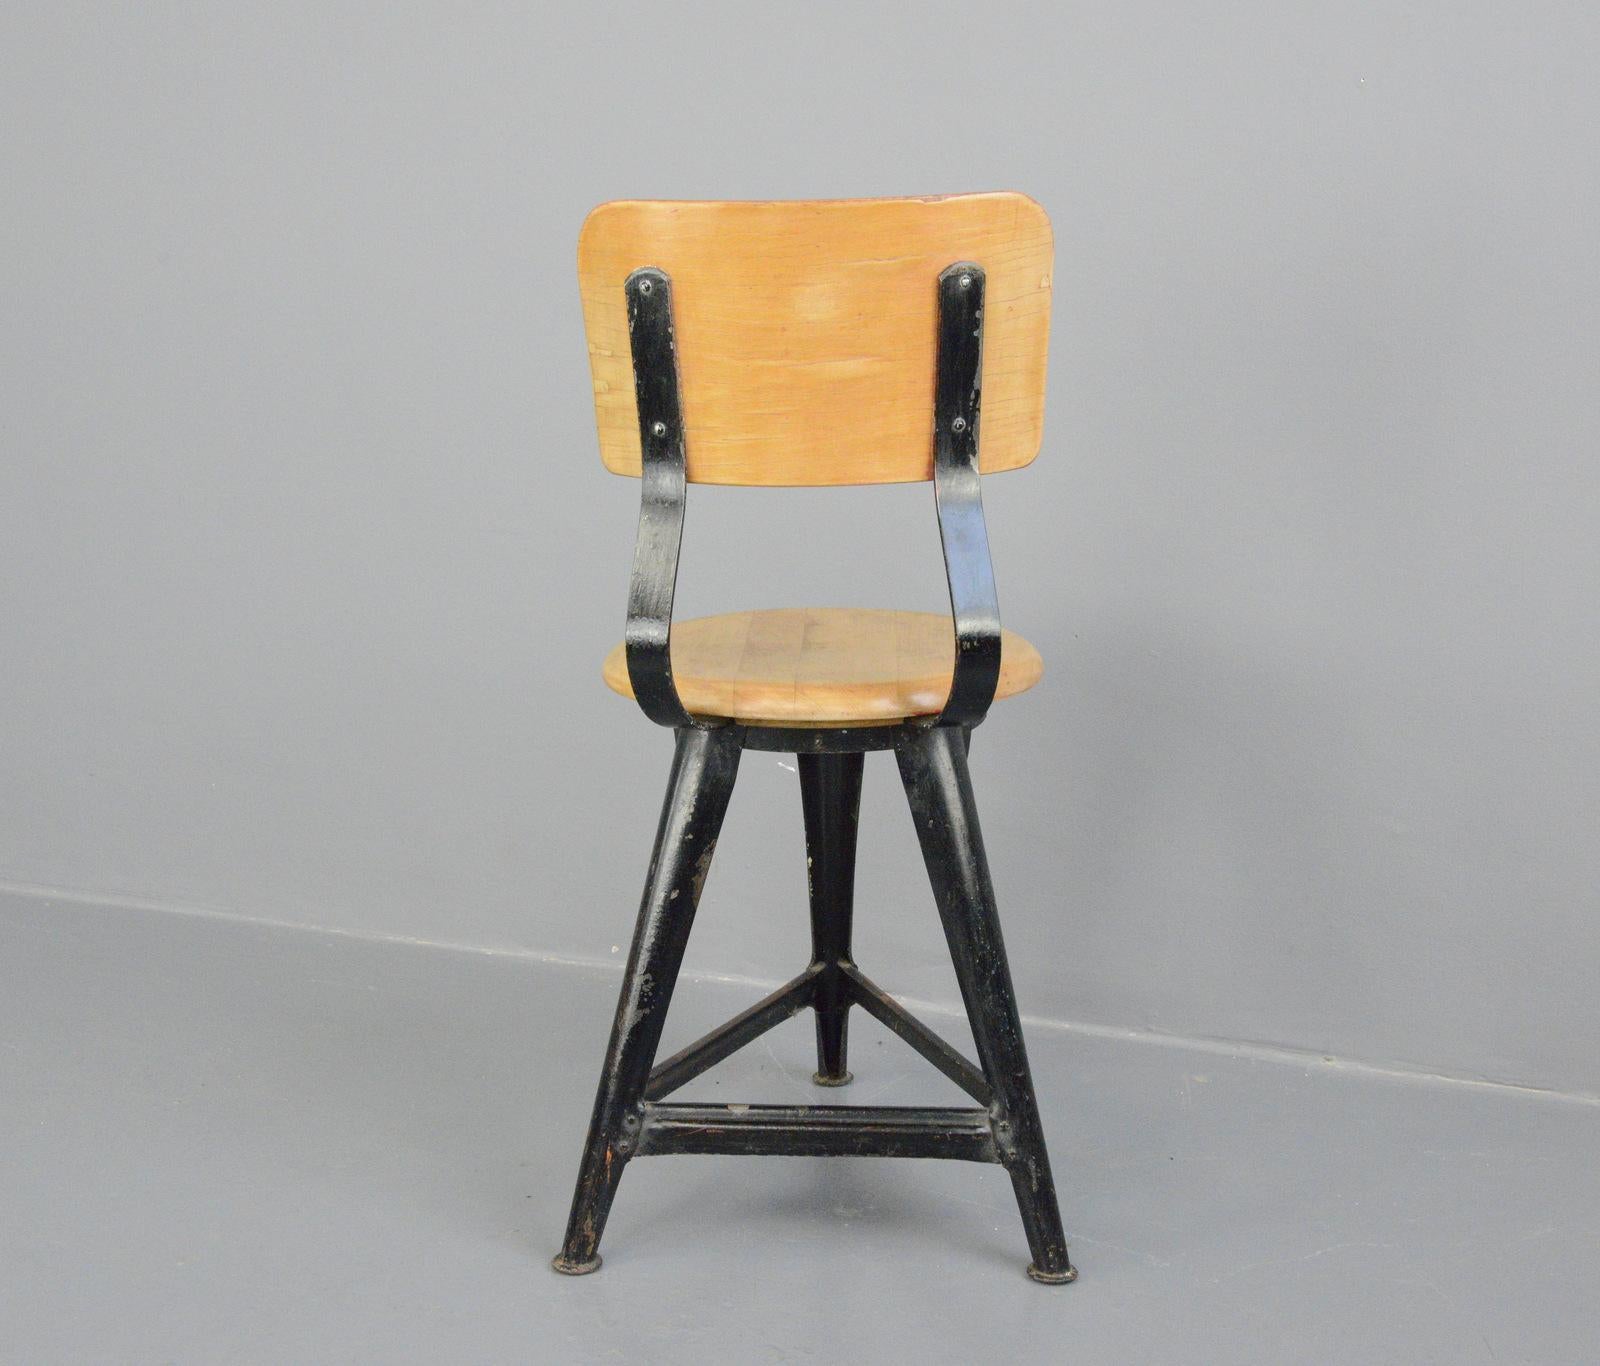 Steel Industrial Work Stools by Ama, circa 1930s For Sale